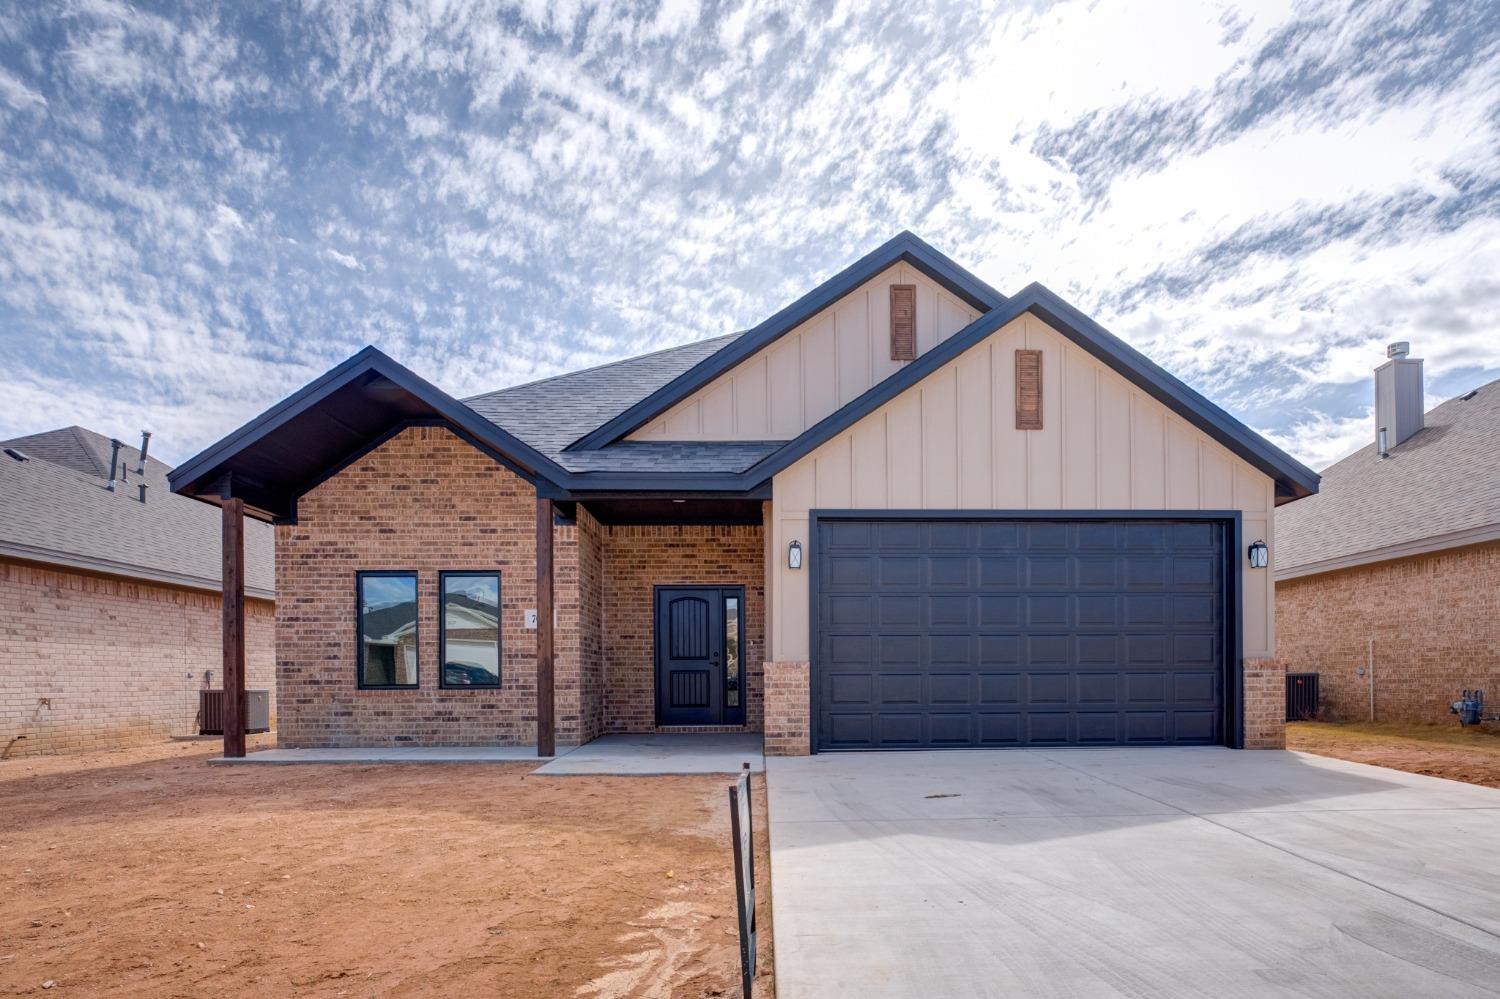 Builder is offering up to $10,000 flex cash! Welcome home to this amazing new construction by Lubbock Lifetime Homes in Burgamy Park! The kitchen boasts a large island, pantry, quartz countertops, and tons of cabinet space. Add in the spacious living room and covered patio to make this the perfect home for entertaining. The isolated master includes a separate shower and soaking tub, double vanities, and a large closet. Located in Frenship Schools with convenient access to Texas Tech, the medical district, many restaurants, and shopping, this is the perfect area to call home!